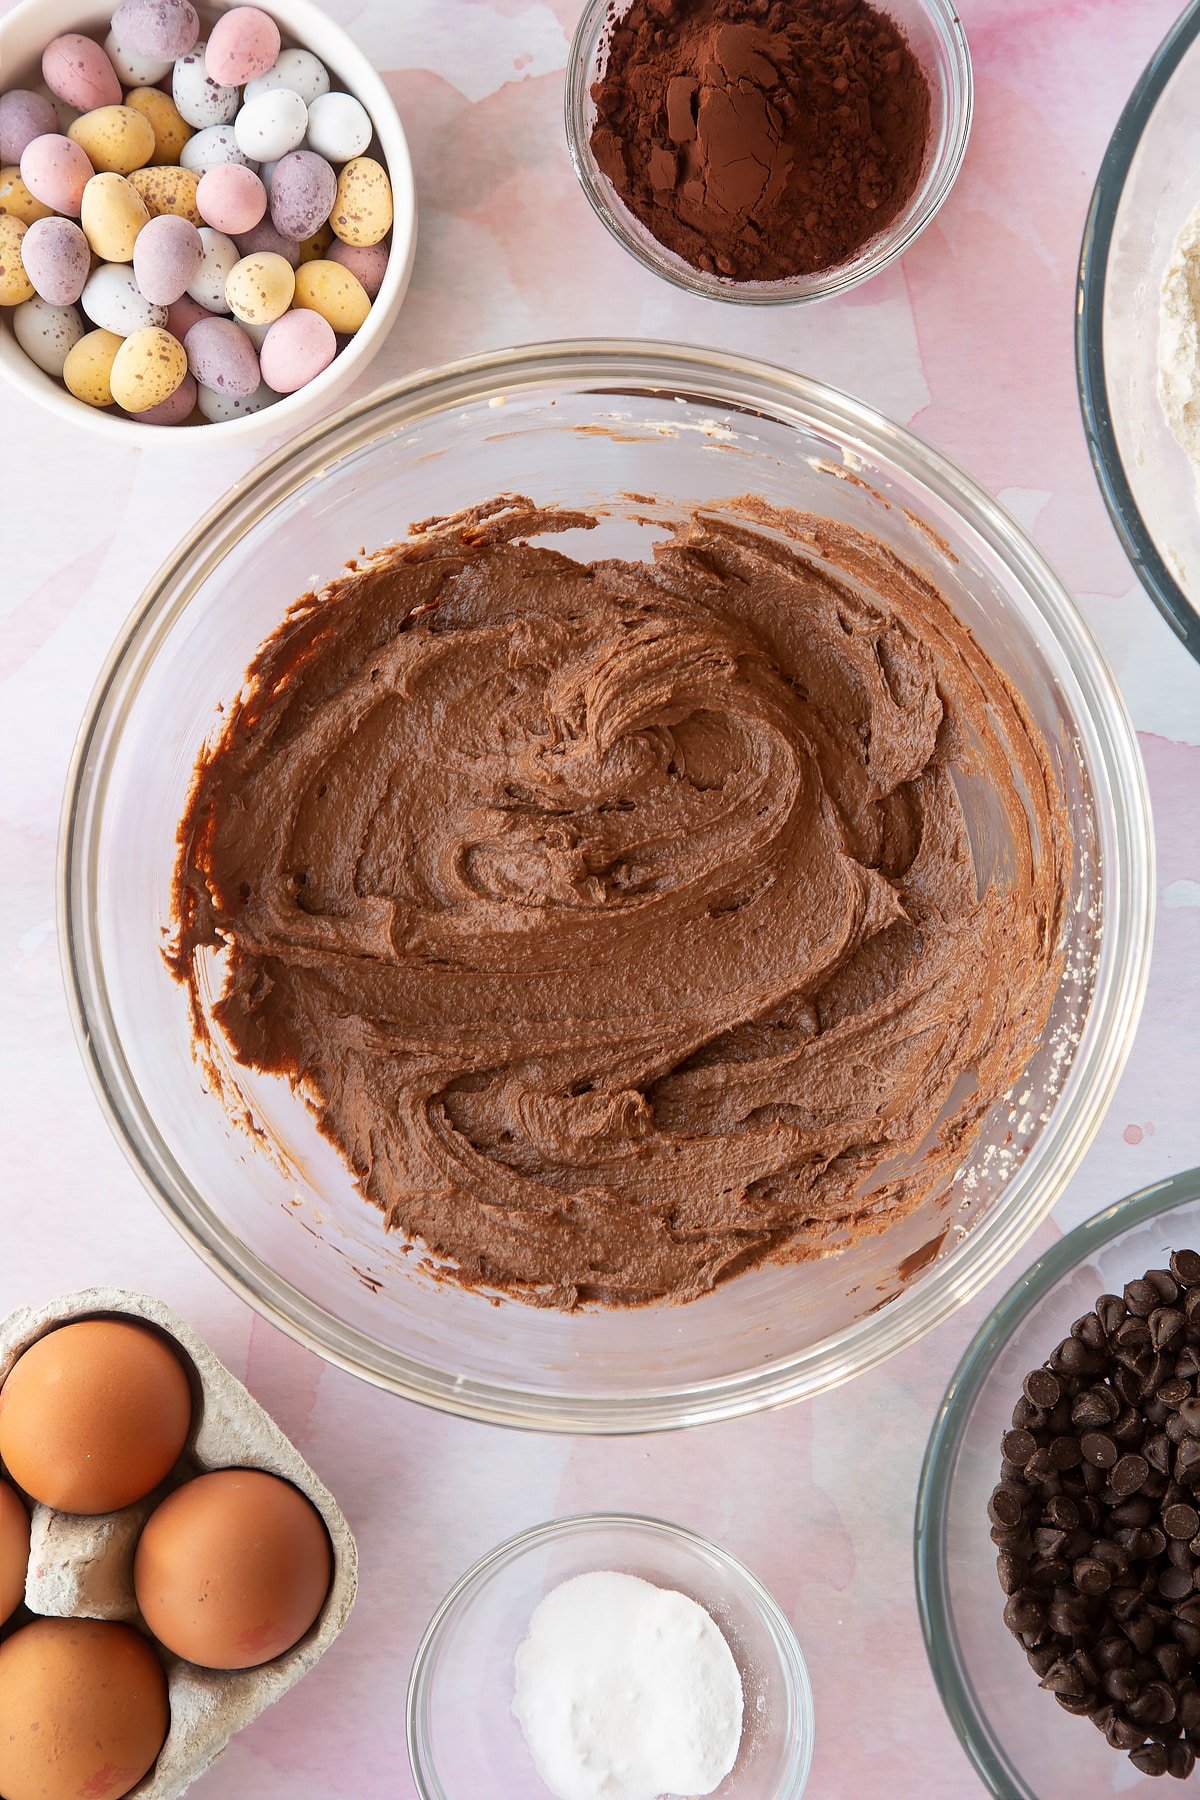 Butter, golden granulated sugar, egg and dark chocolate beaten together in a bowl. Ingredients to make Chocolate Easter cookies surround the bowl.